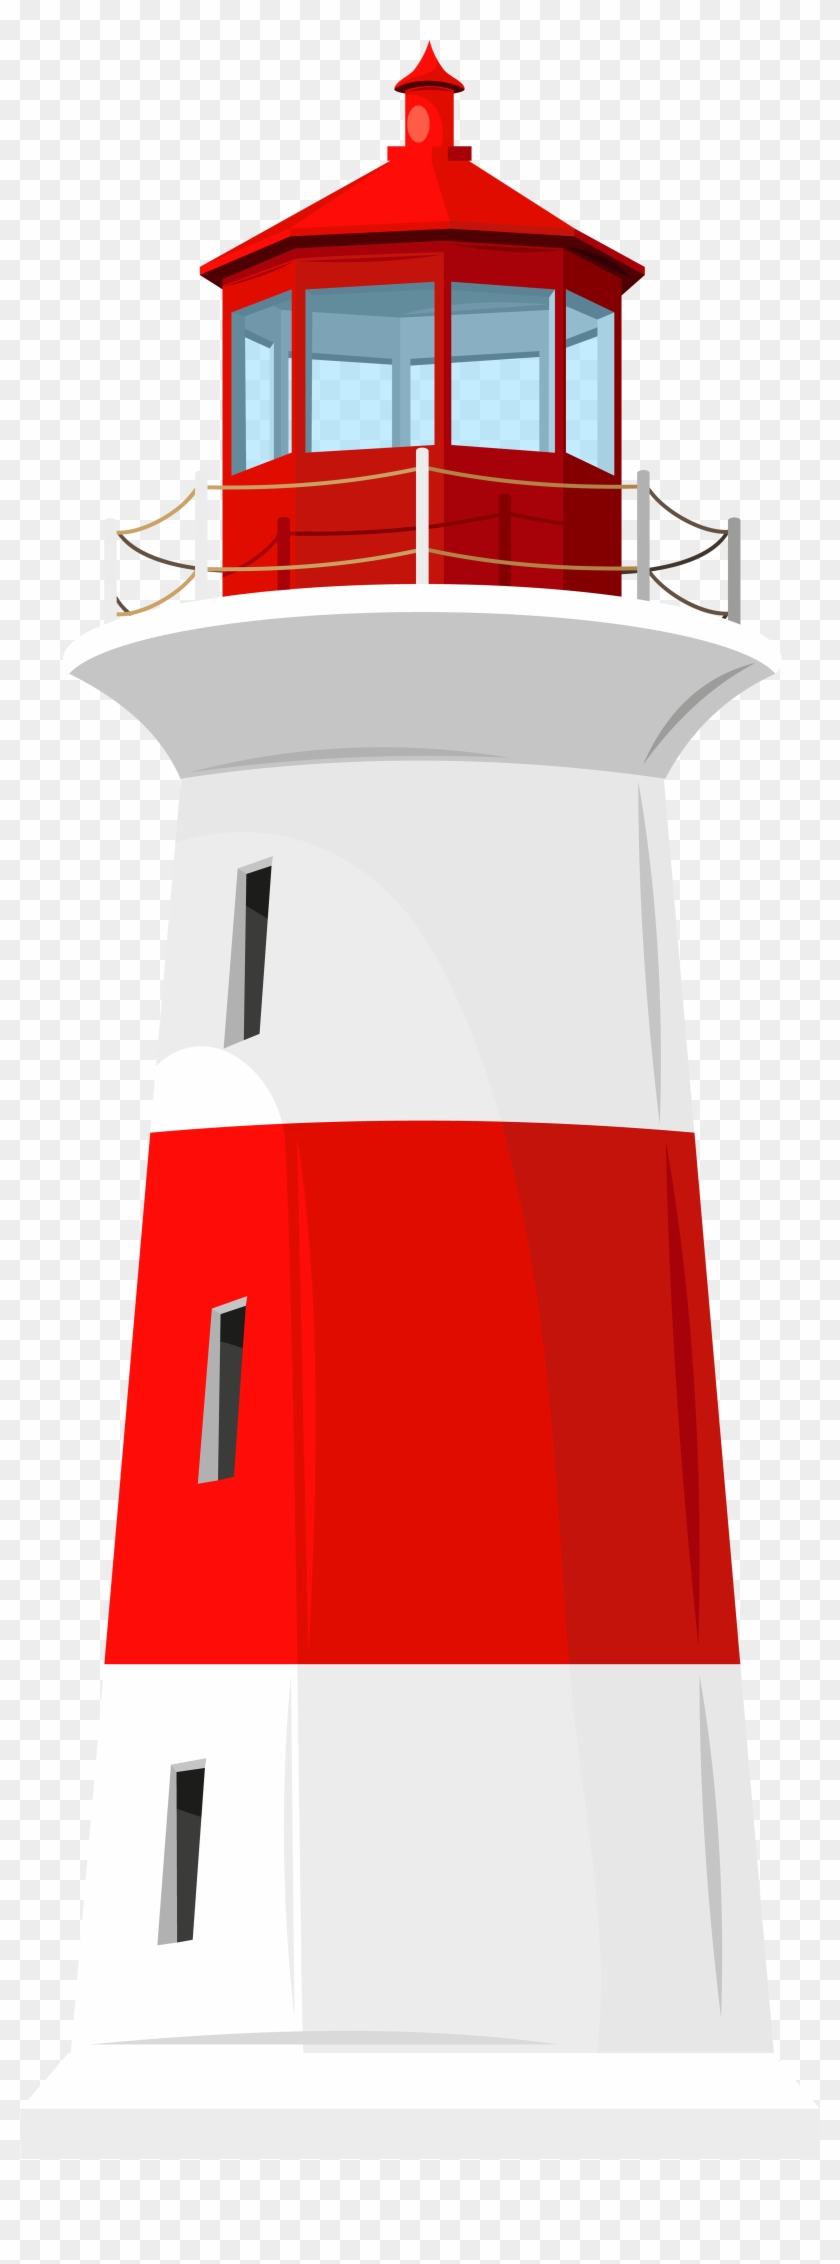 Lighthouse - Free Lighthouse Vector #809414